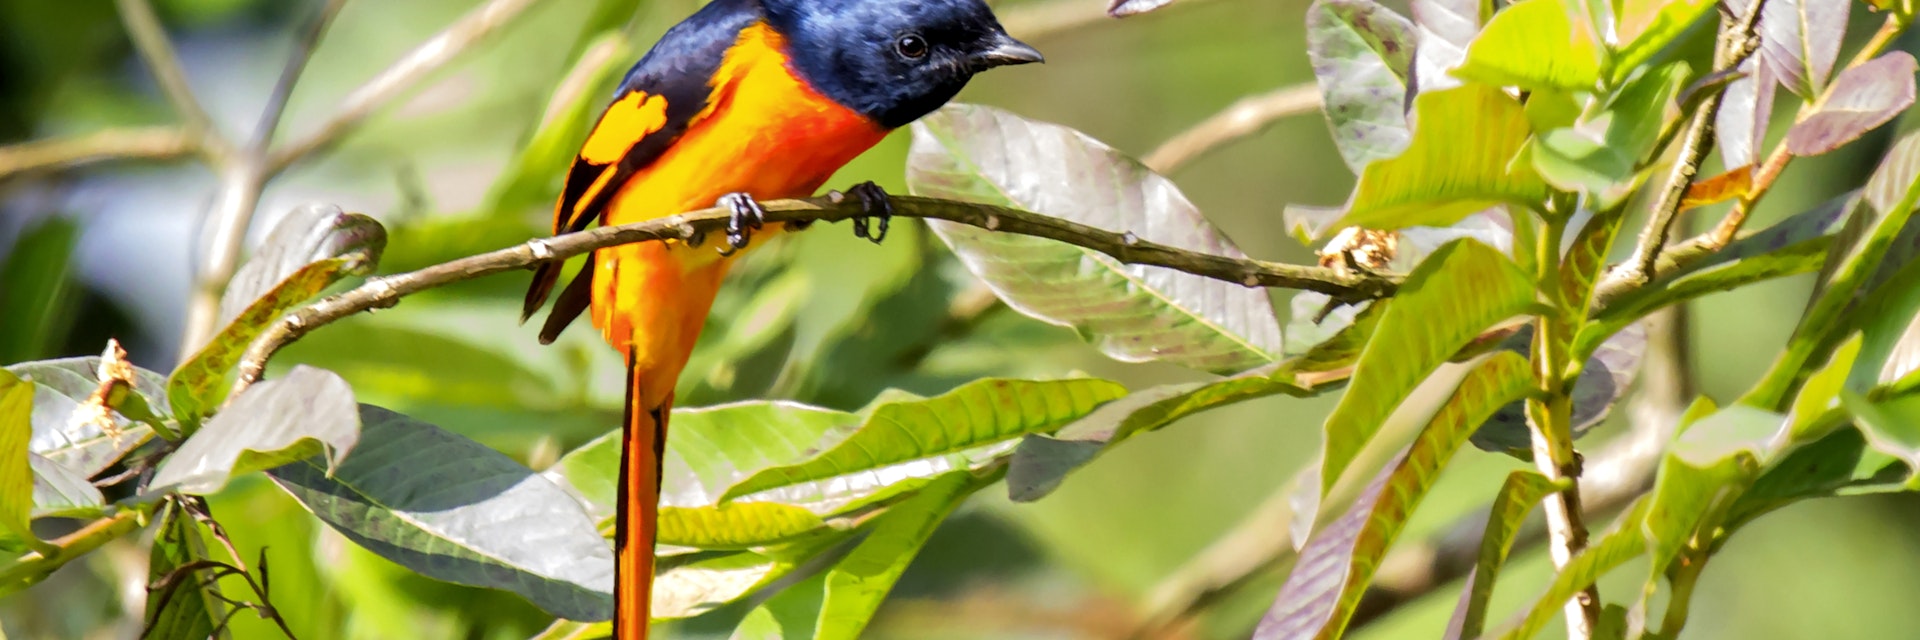 The Scarlet Minivet (Pericrocotus speciosus) is sitting on a plant and watching doubtfully.